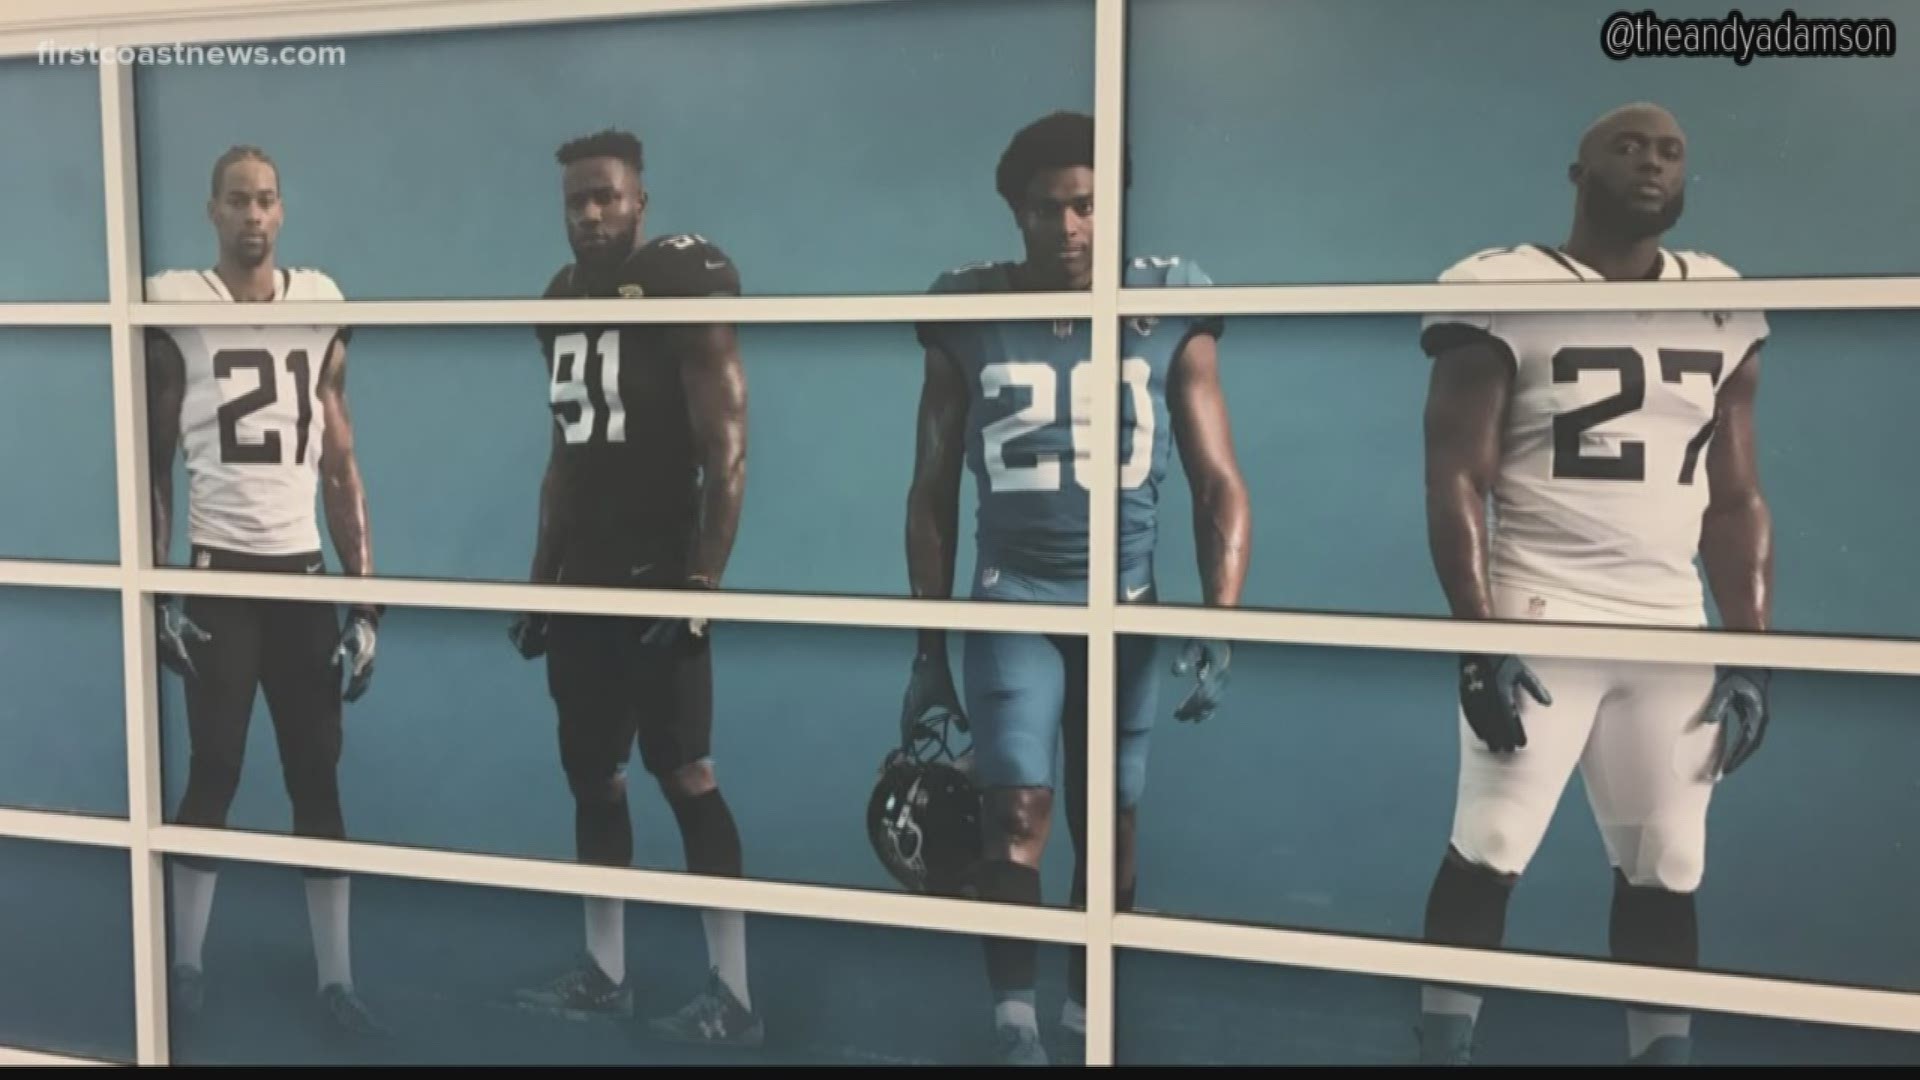 A billboard was put up at JIA showing Jaguars players wearing a different uniform.